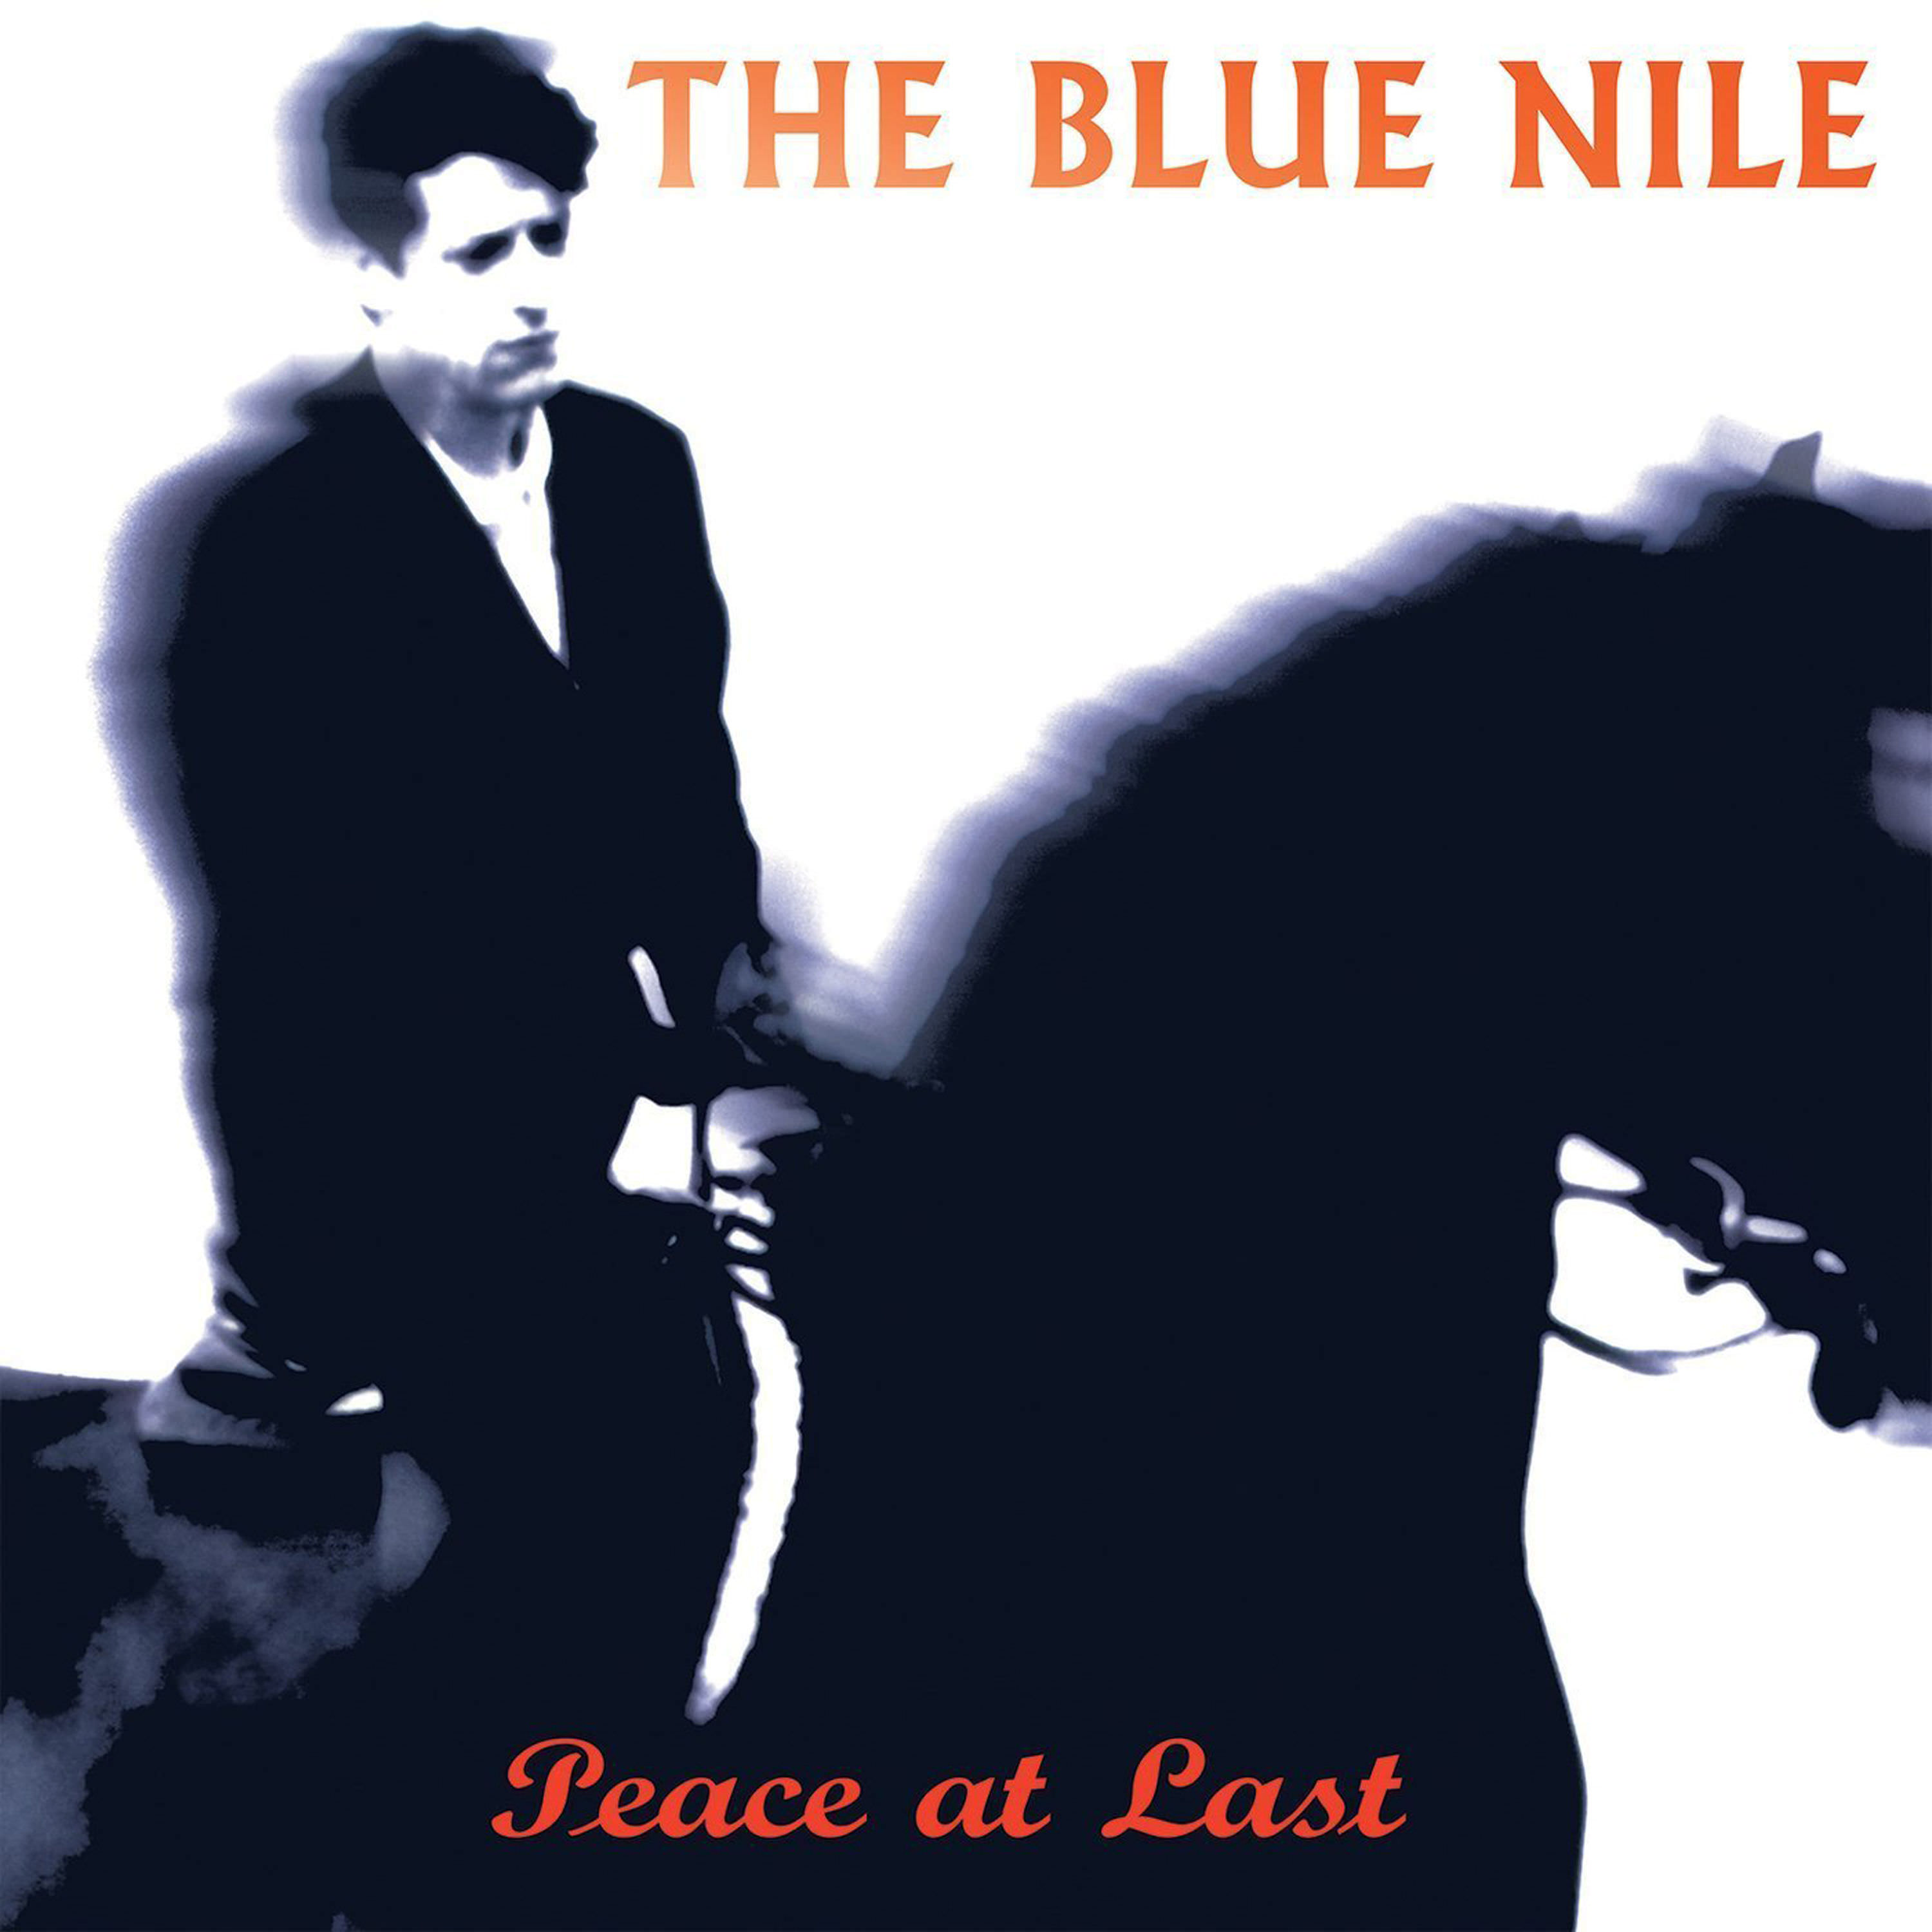 The Blue Nile - Peace At Last (Deluxe Edition) (1996/2014) [FLAC 24bit/44,1kHz]